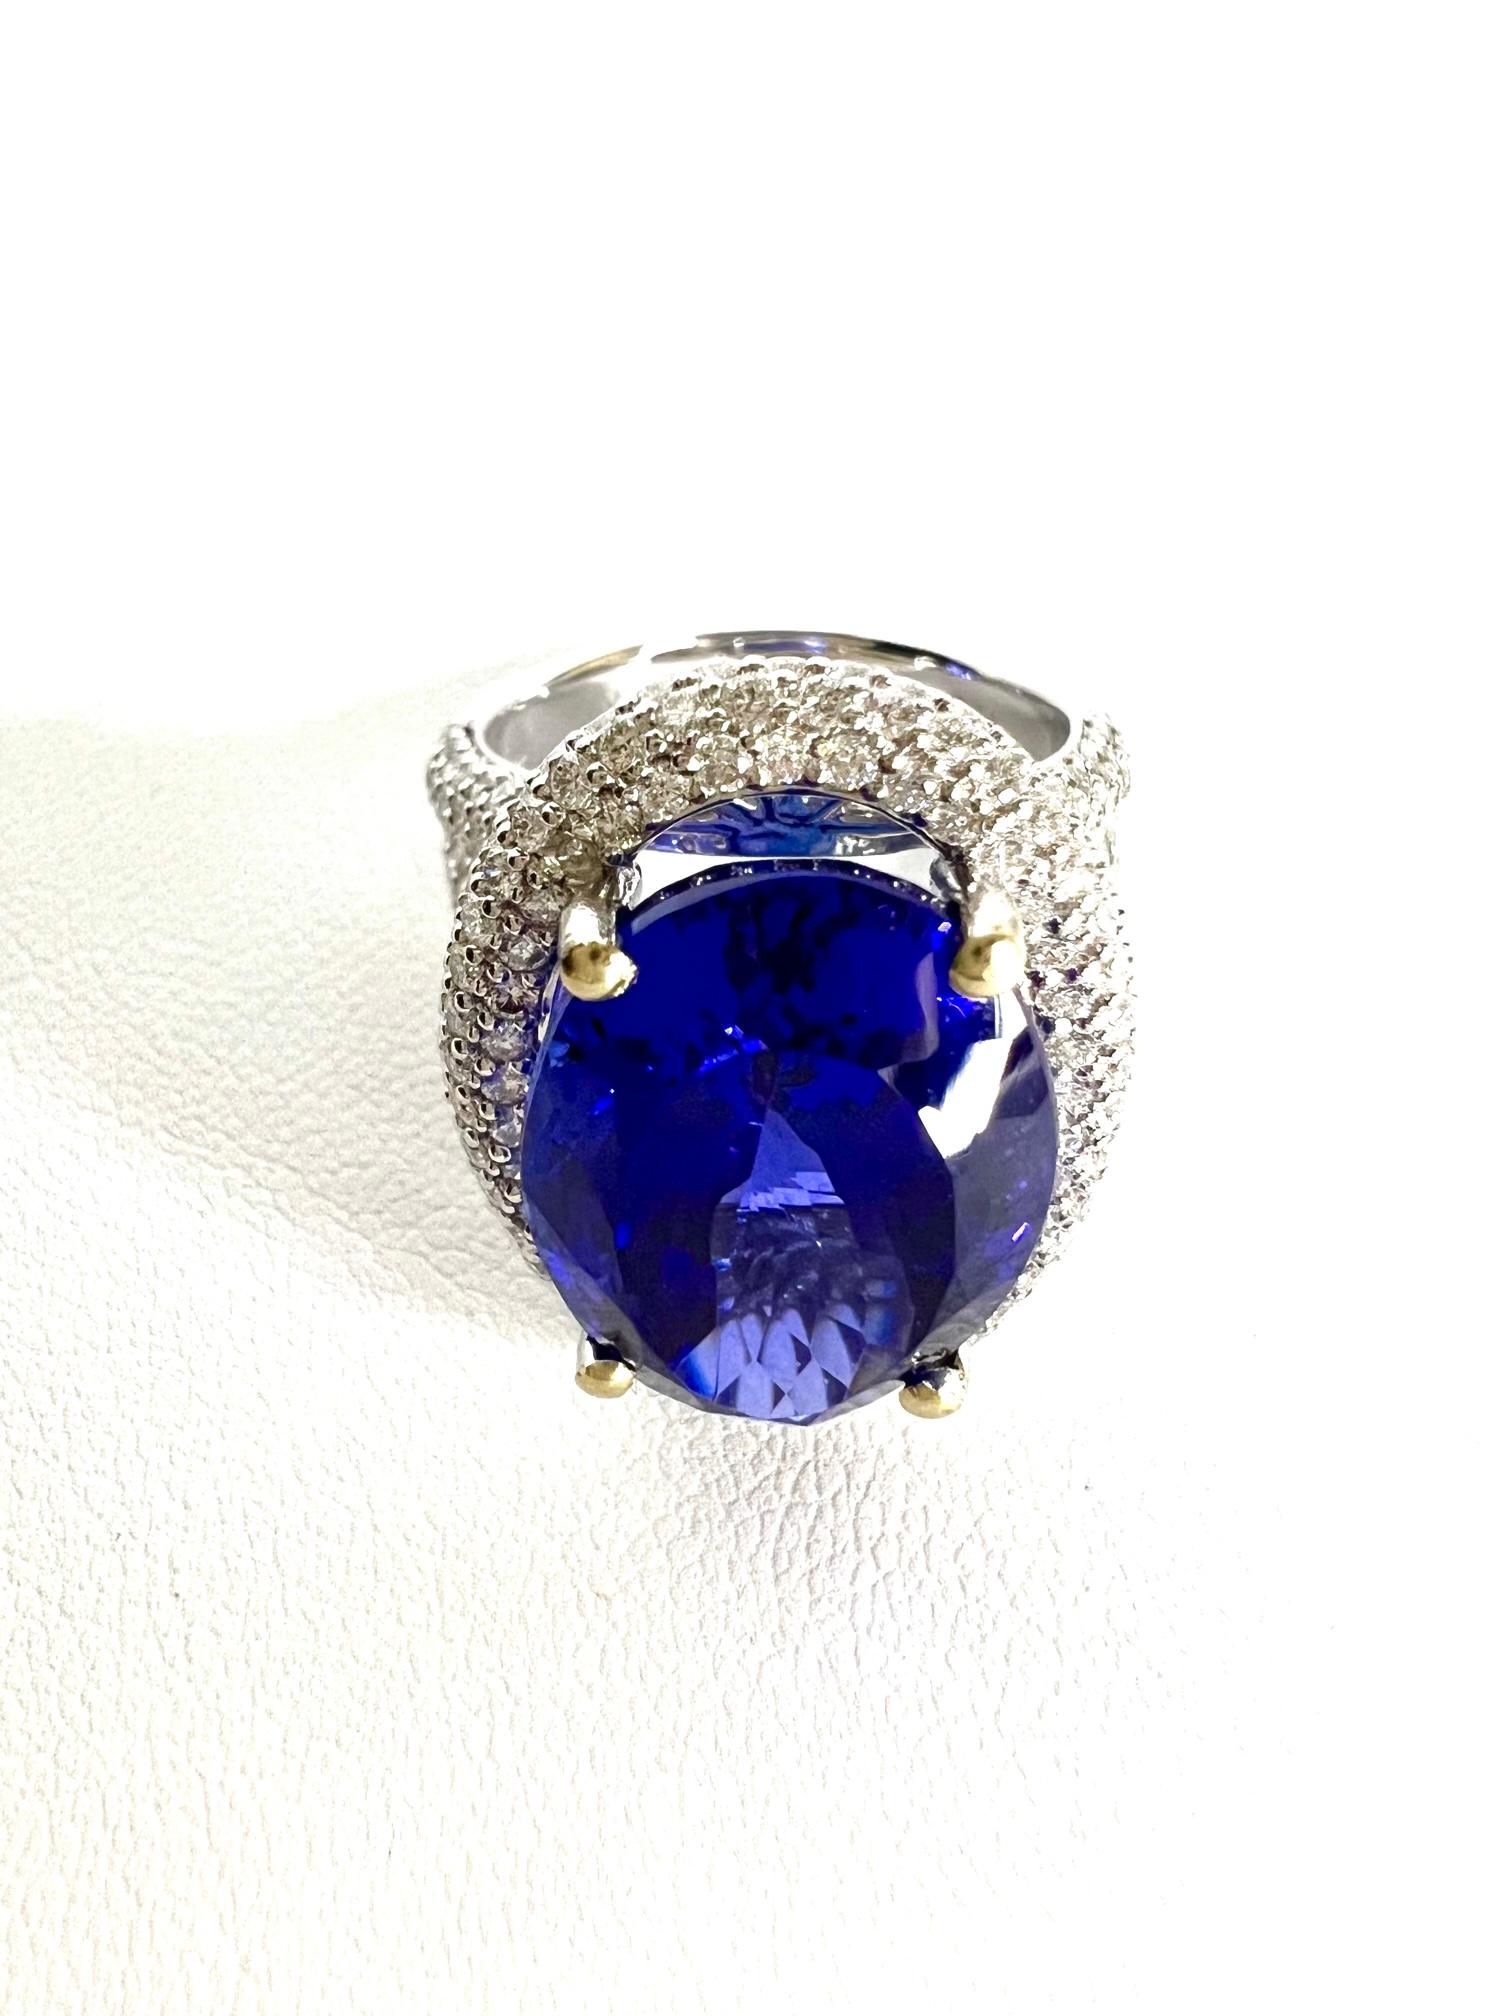 Thomas Leyser is renowned for his contemporary jewellery designs utilizing fine gemstones.

1 ring in 18k white gold 9,8gr. with 1 Tansanite fac. (deep blue color) top quality oval 16,3x12mm 12,68cts. and diamonds round 1,2mm, E/VS